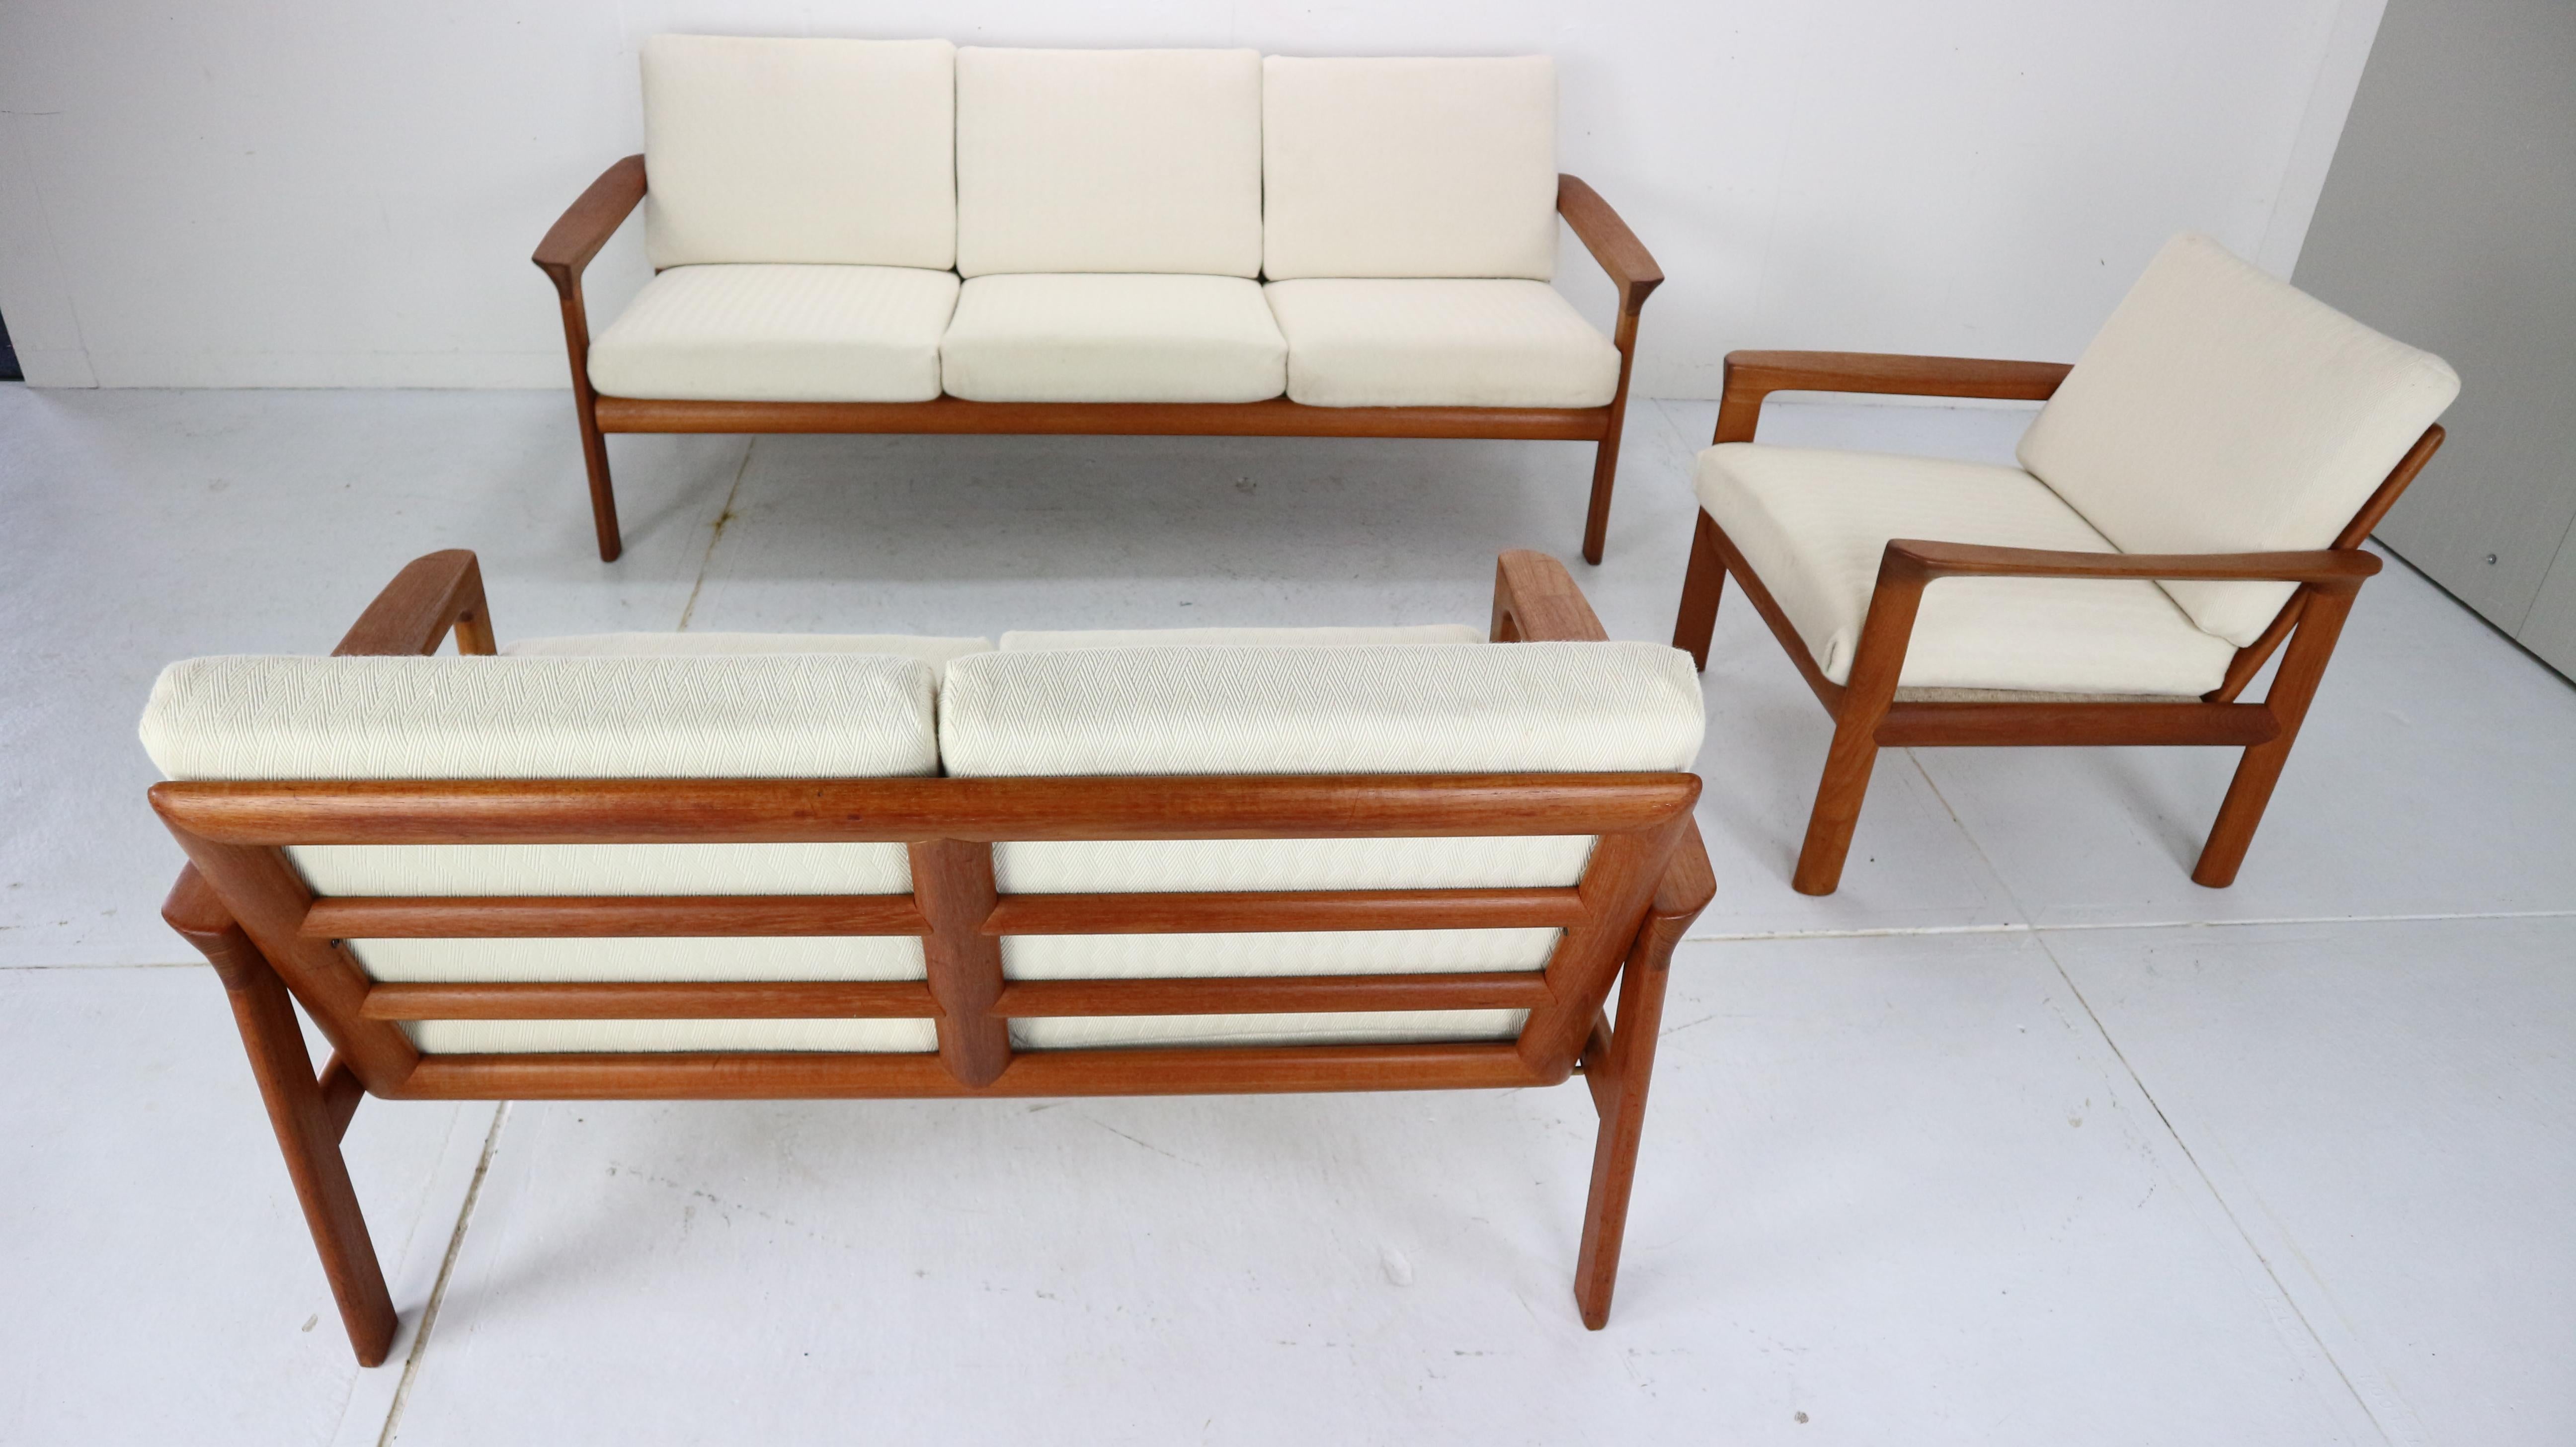 This 'Borneo' beautiful and elegant living room set was designed by Sven Ellekaer for Komfort, Denmark in the 1960s.
Set consists: Measures Lounge chair (SH x 42 H x 77 W x 76 D x 85cm), 2-seat sofa (SH x 42 H x 80 D x 80 W x 136cm) and 3-seat sofa